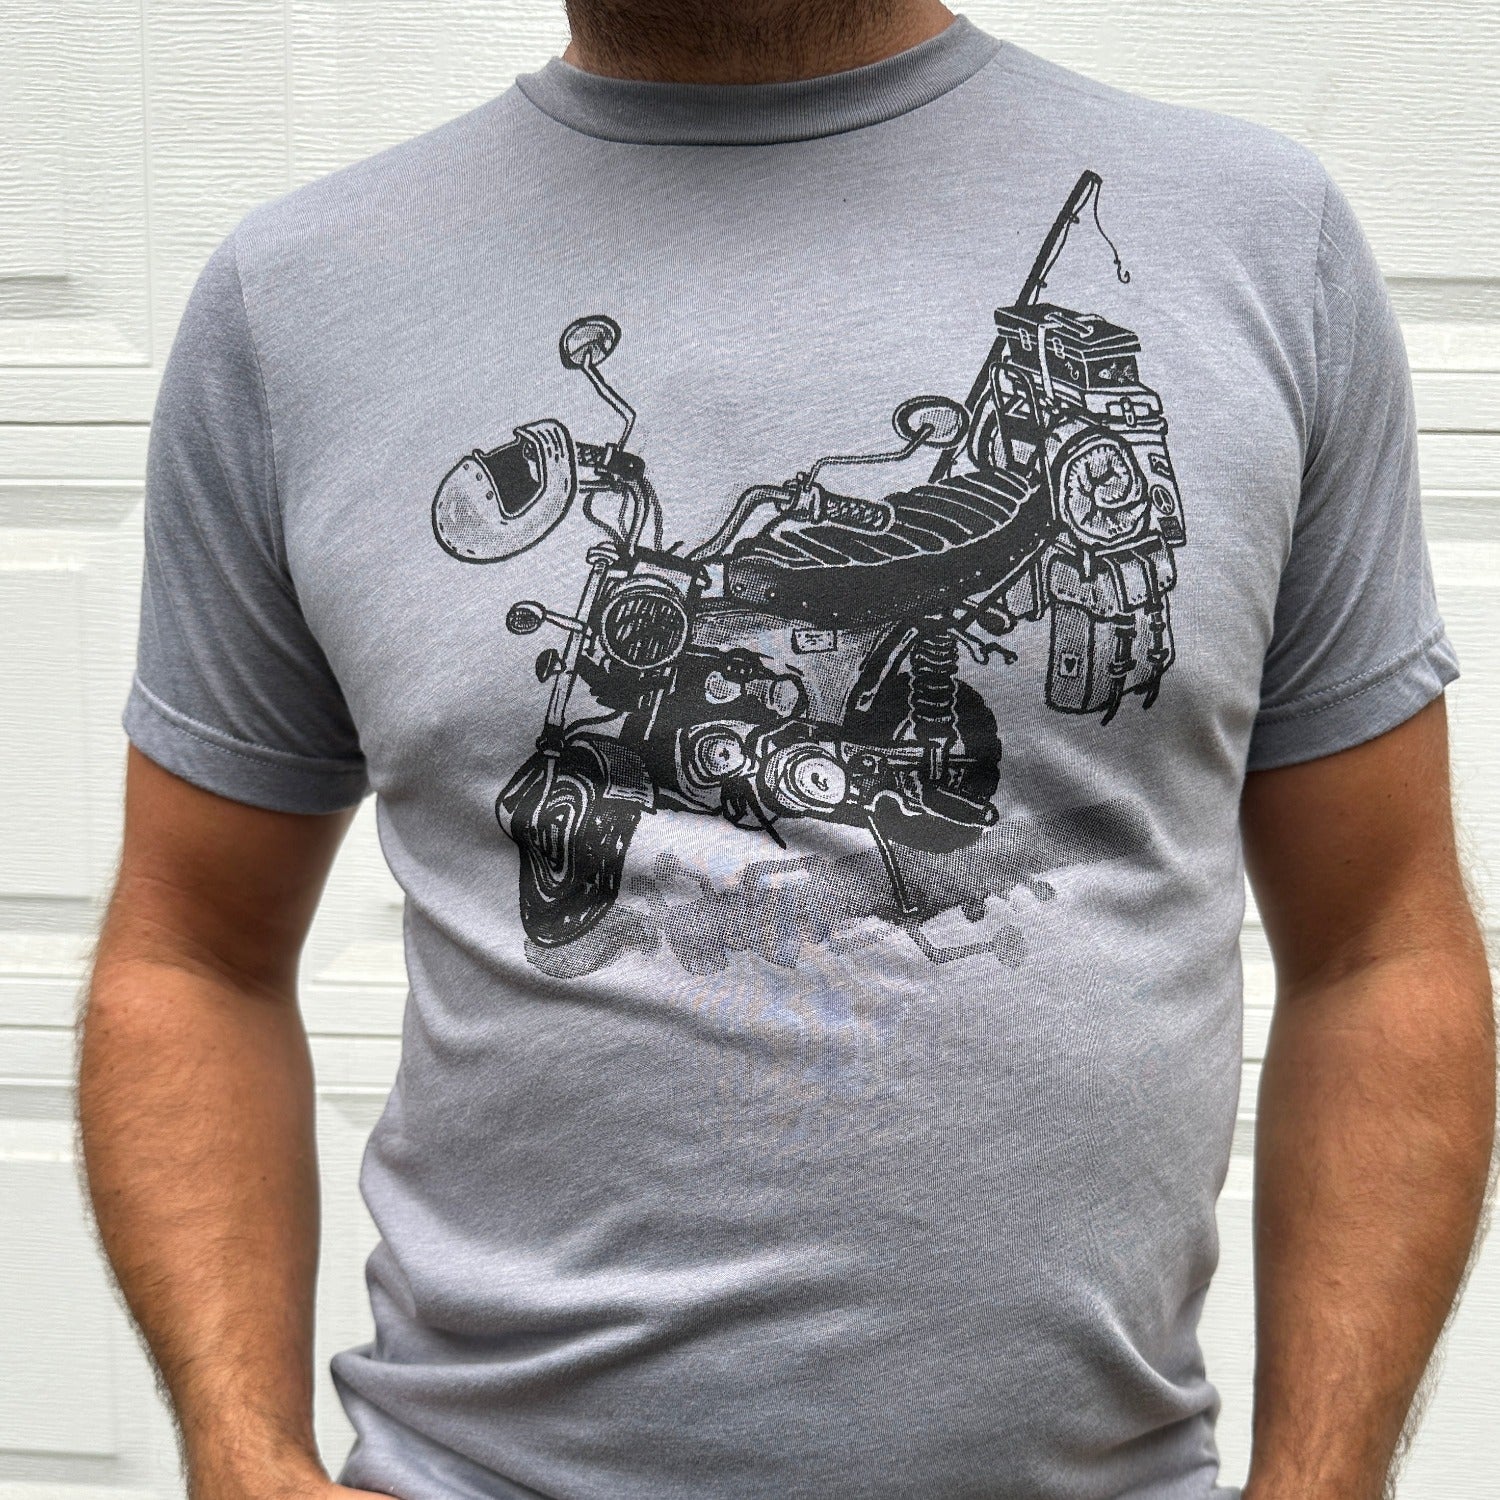 Black print on a grey colored t-shirt. Print is of a mini-bike loaded up with fishing pole, helmet, sleeping bag, and bags.